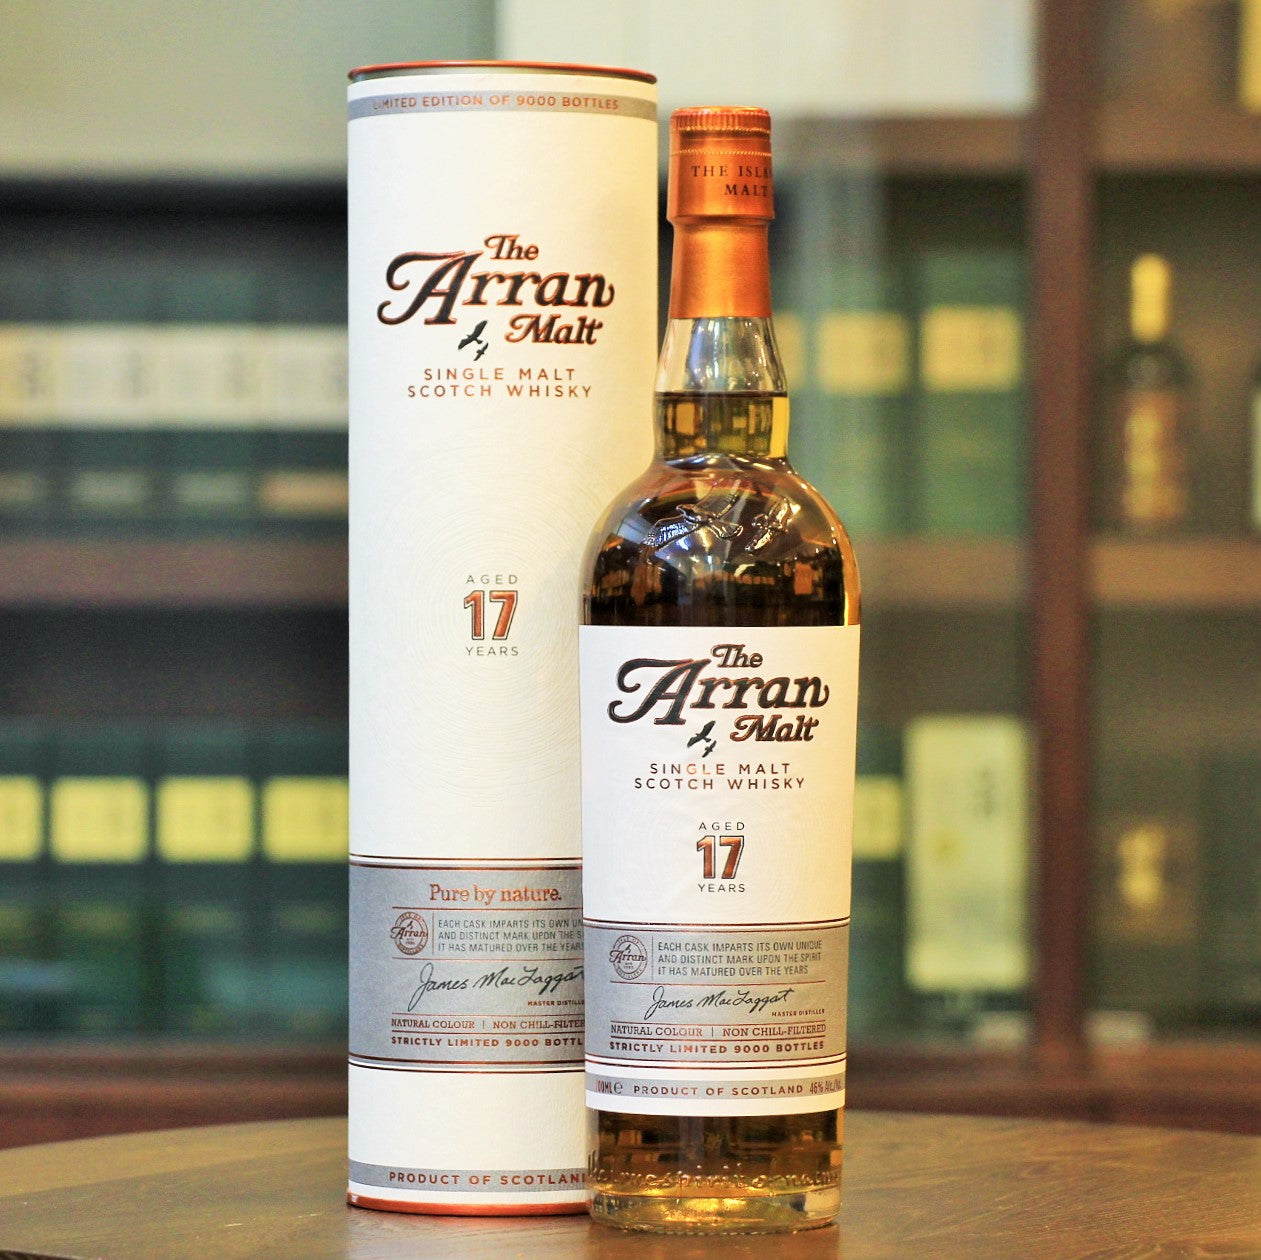 A limited edition bottling of 9000 bottles released in 2014, this 17 years old whisky from the Arran Distillery has been distilled from un-peated barley and matured in Ex-Sherry Casks. Color: Antique Gold with copper highlights Aroma: Warm spices, candied citrus peel and tinned mandarins with classic Arran orchard fruits. Palate: Sweet spice and cigar tobacco. Water adds depth and reveals dark chocolate and orange oils. Finish: Long and warm with sherry wood character and puff of bonfire smoke. 